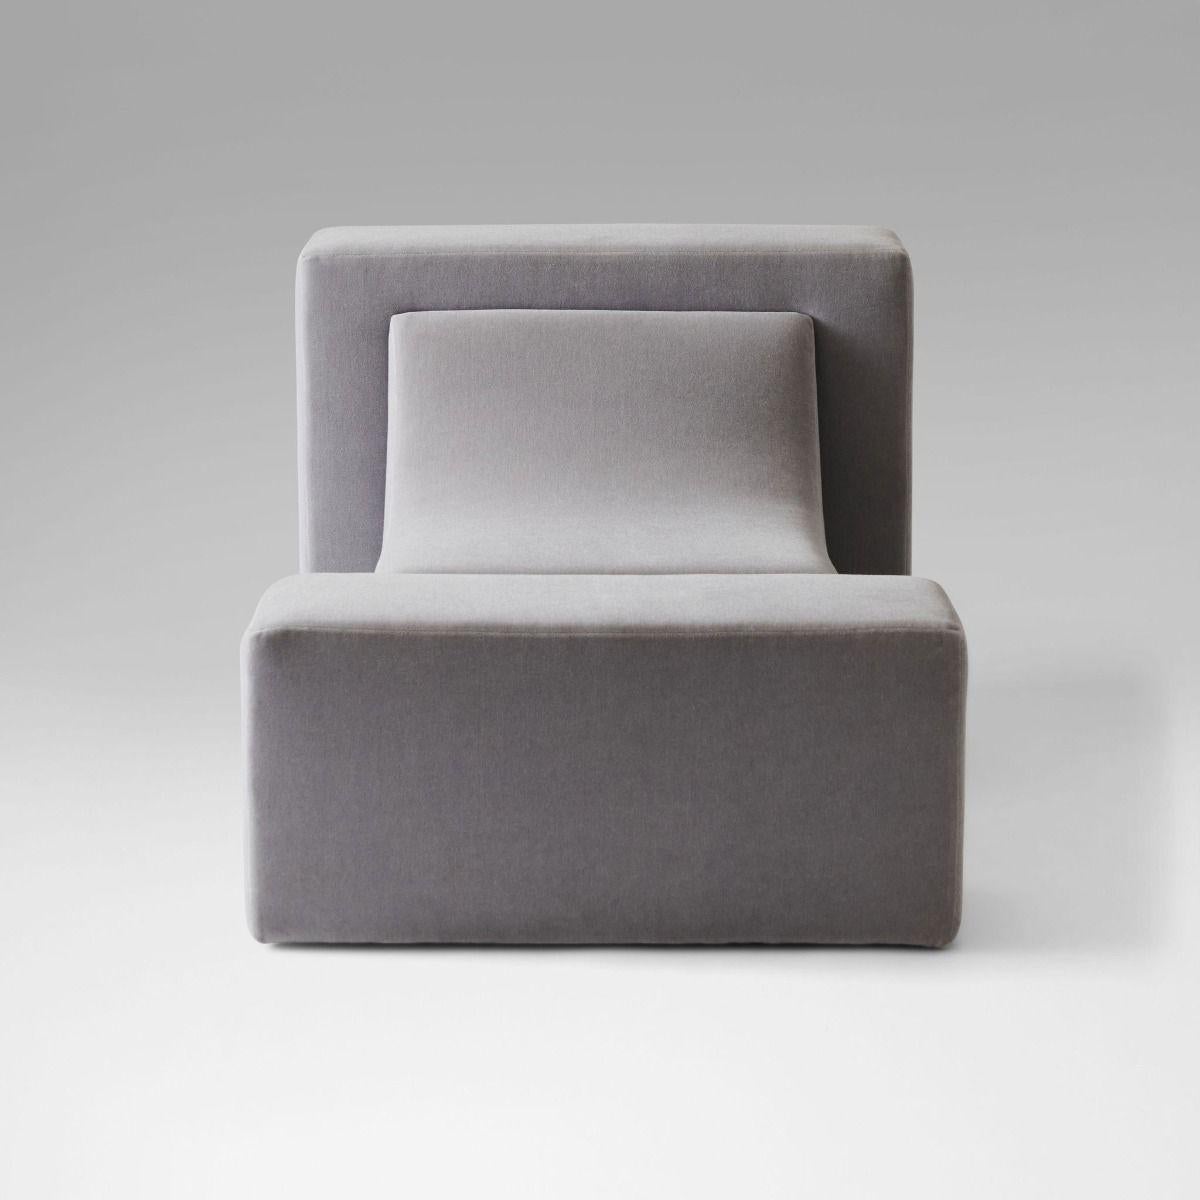 Upholstered lounge chair. Shown in mohair fabric.